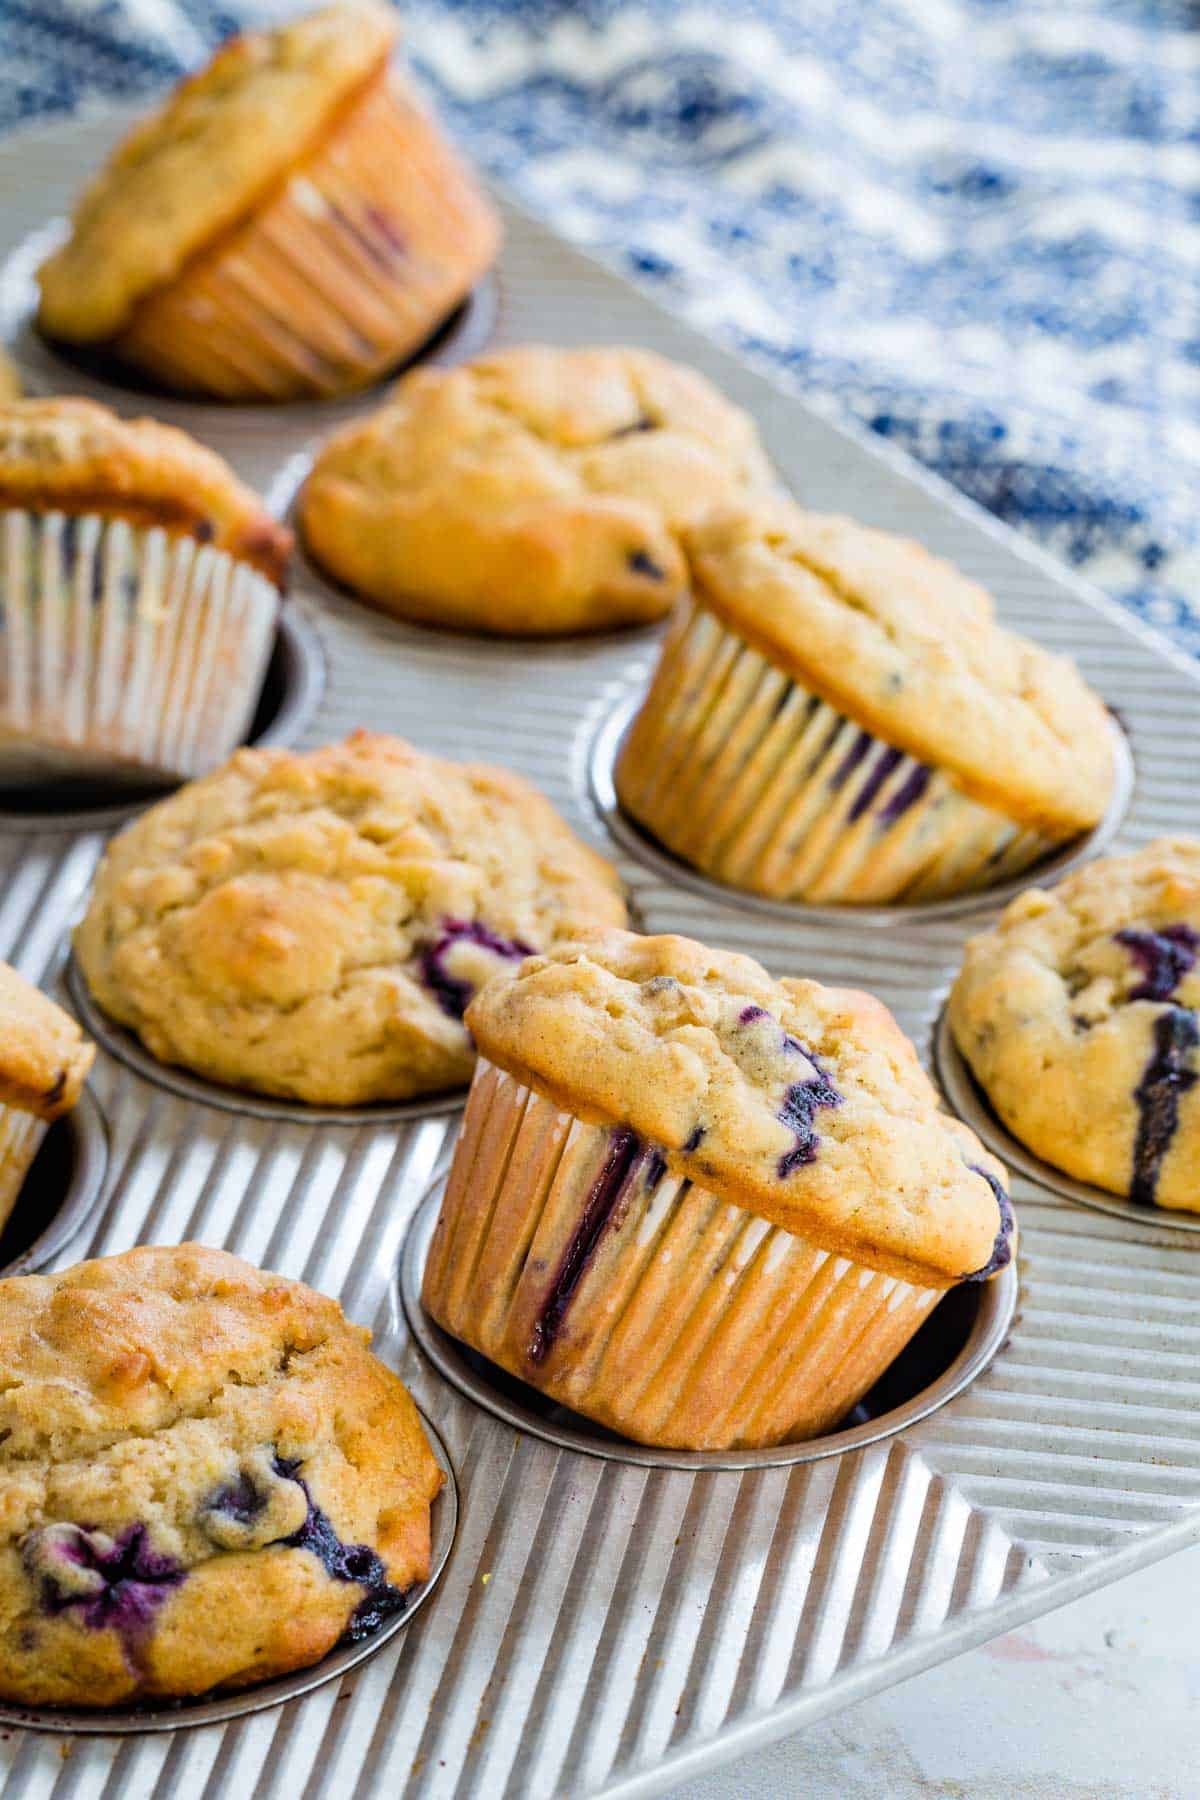 A 12-count muffin tin with a batch of blueberry banana muffins in it